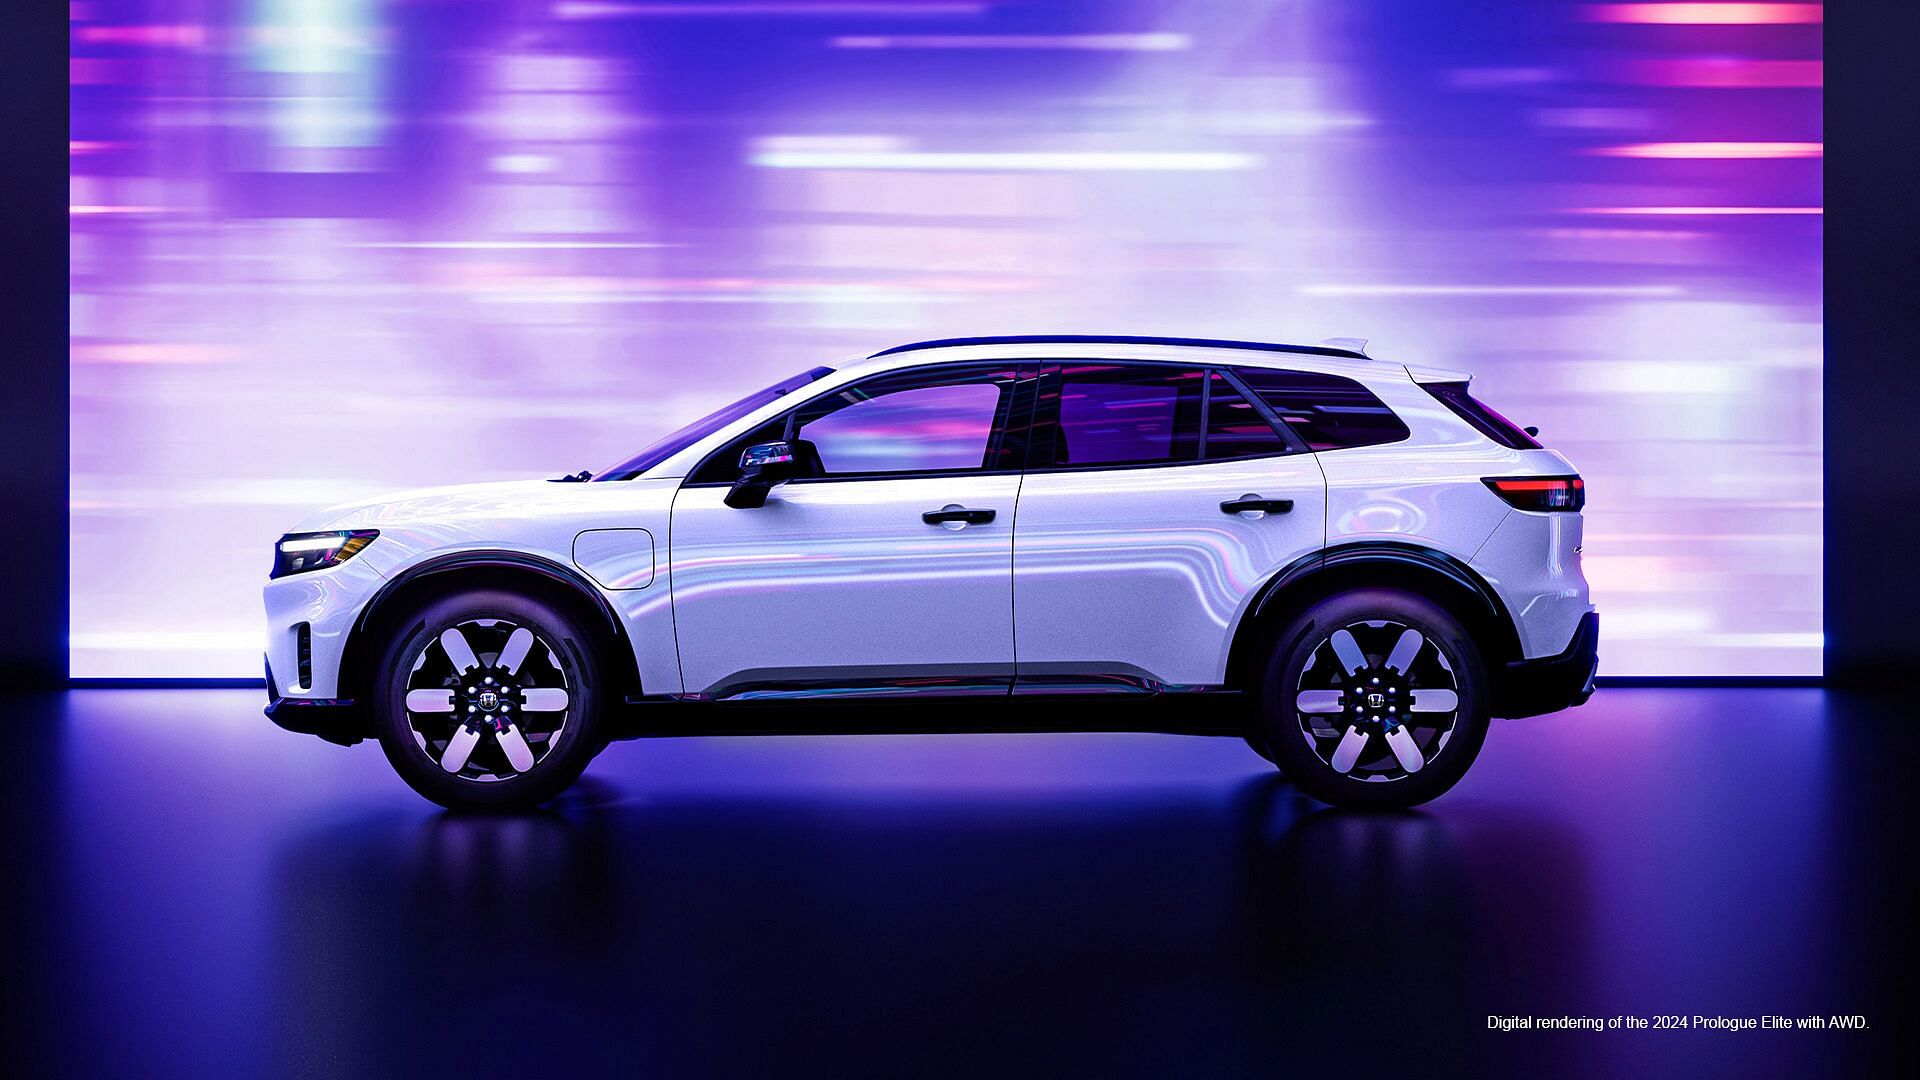 Digital rendering of the 2024 Prologue Elite with AWD